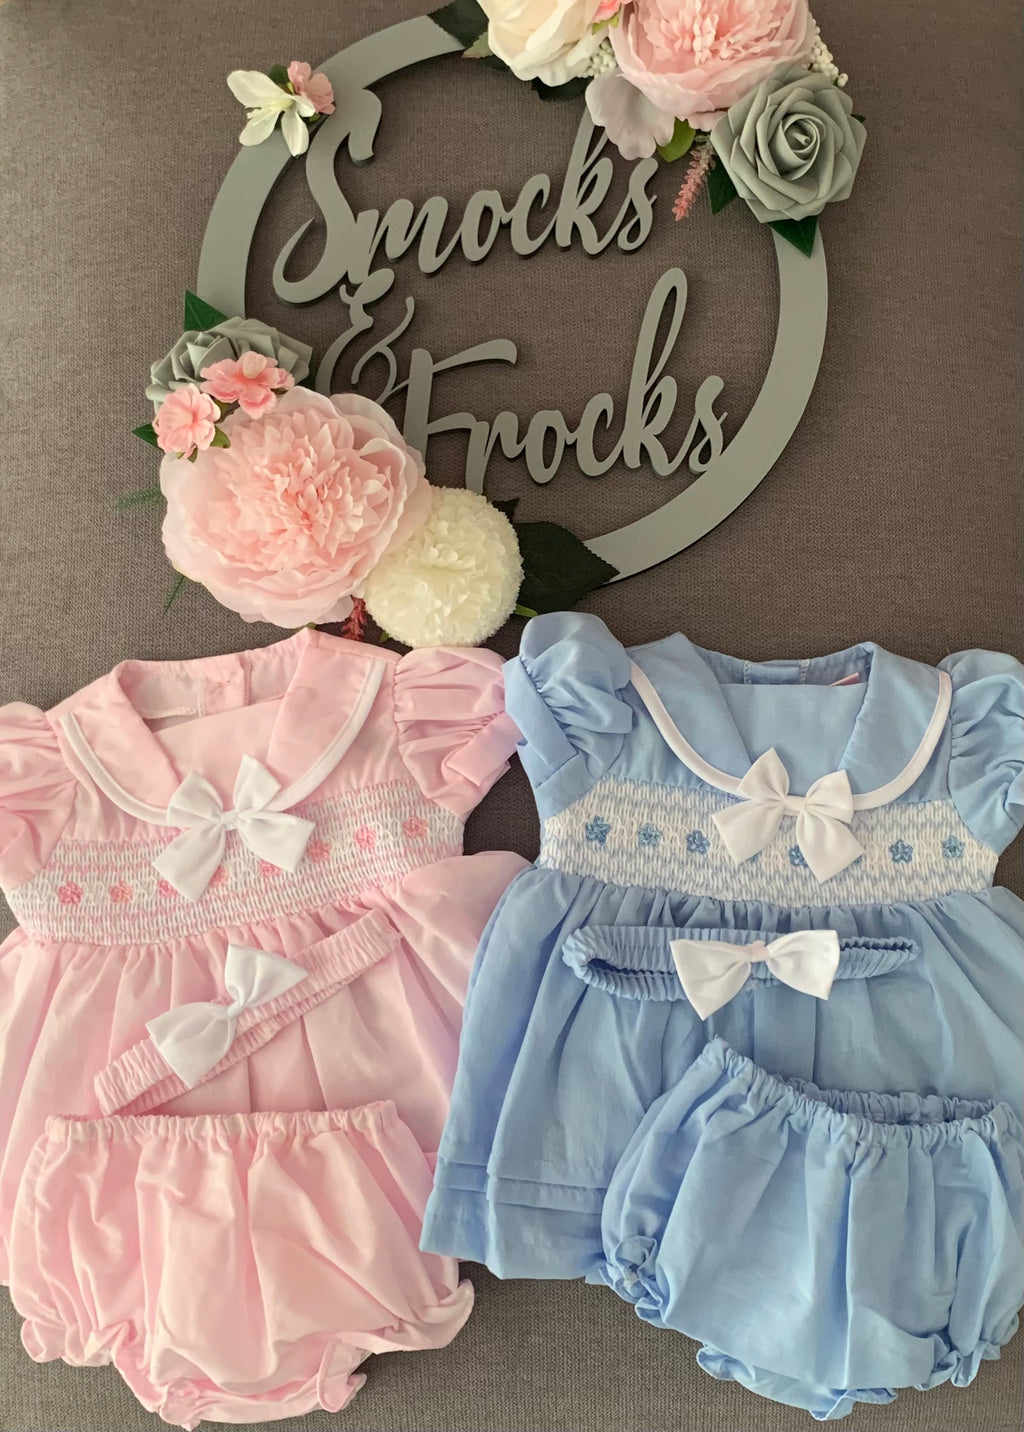 Rock-A-Bye - Smocked Dress with Bow Detail and Matching Headband - D06364A